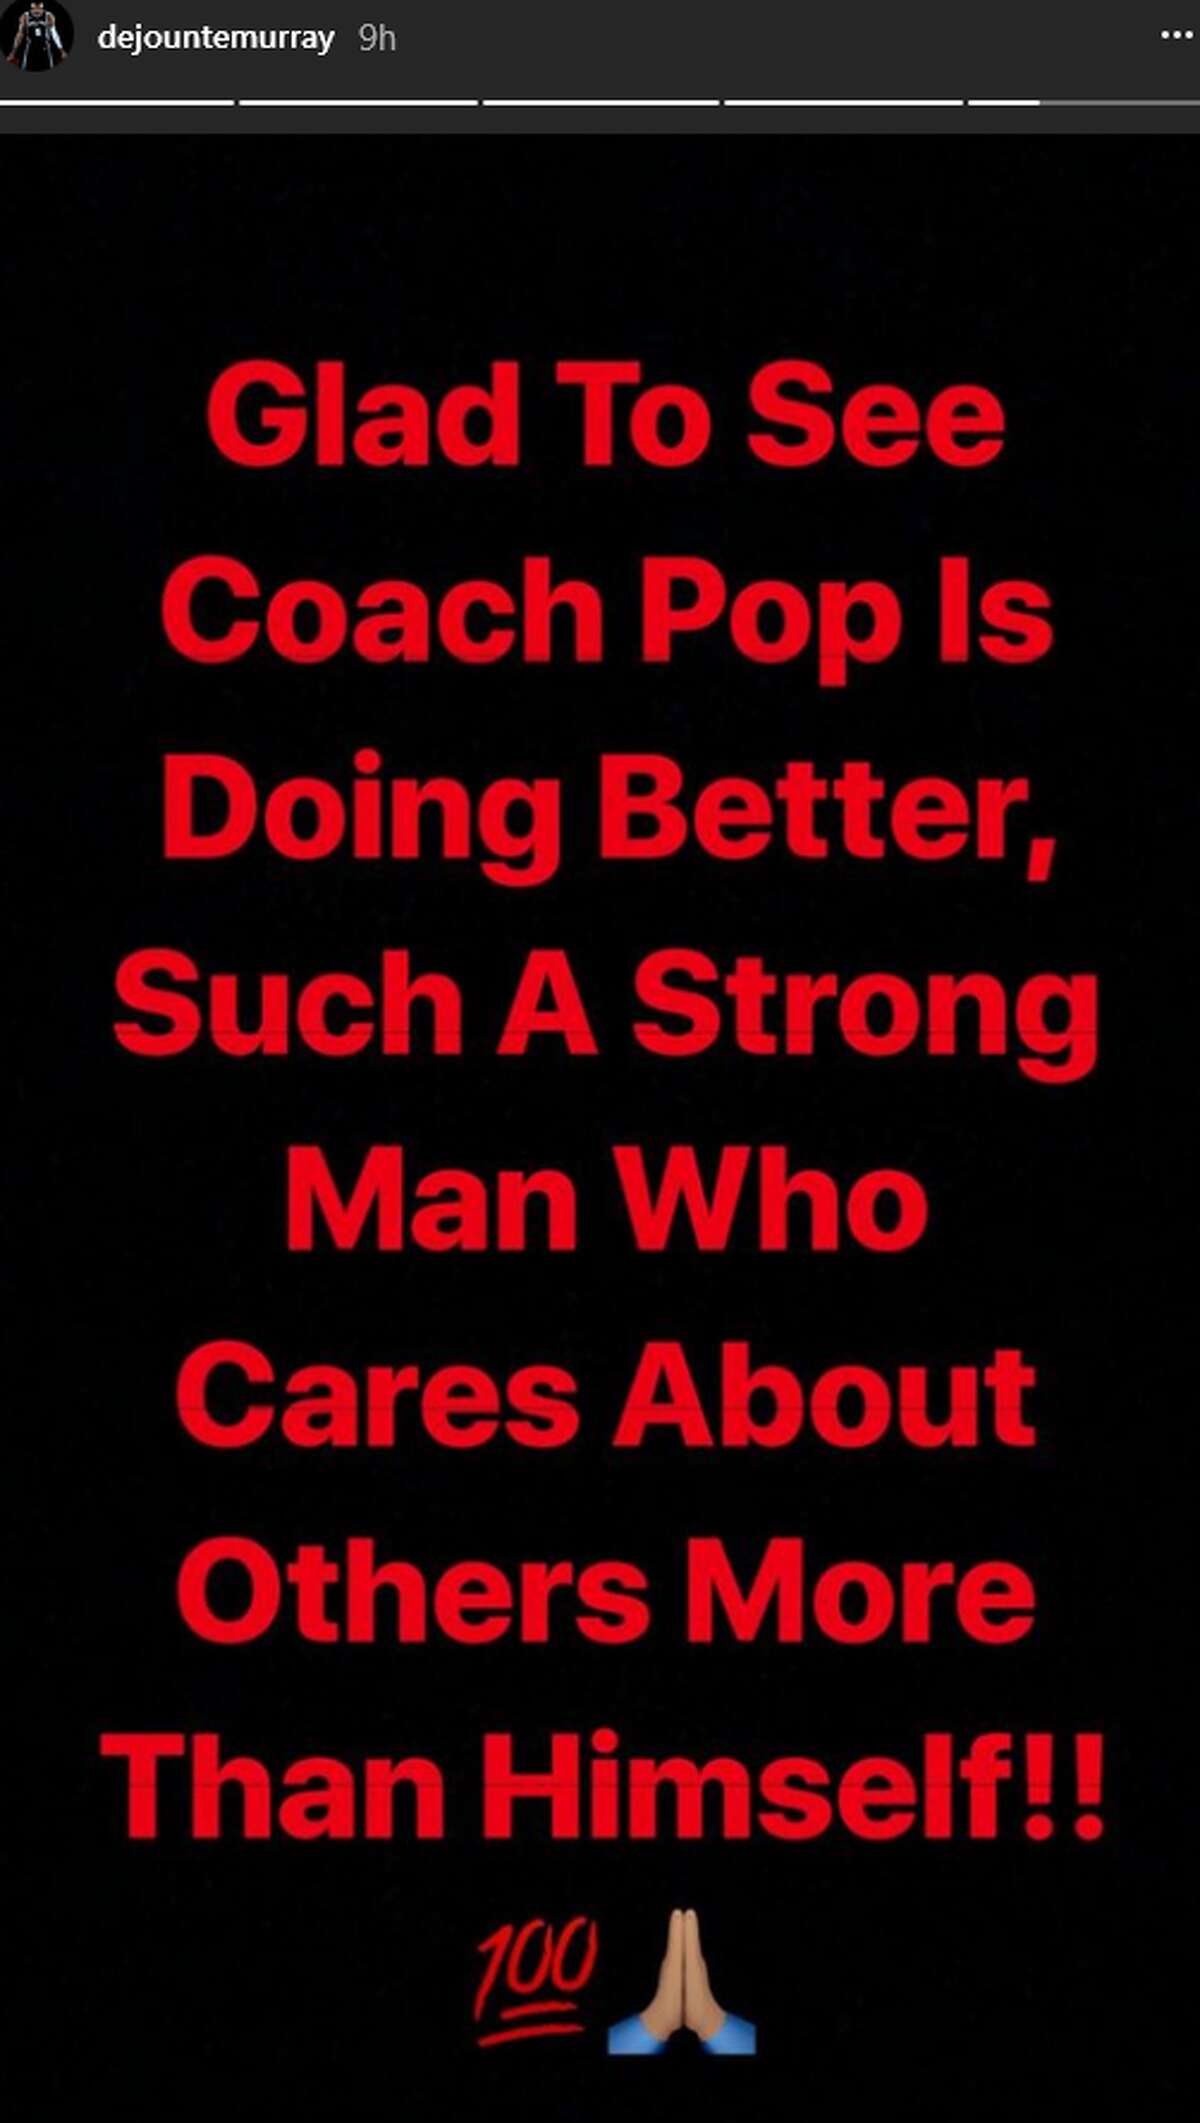 "Glad To See Coach Pop Is Doing Better, Such A Strong Man Who Cares More About Others More Than Himself," Dejounte Murray's message posted to an Instagram story read.